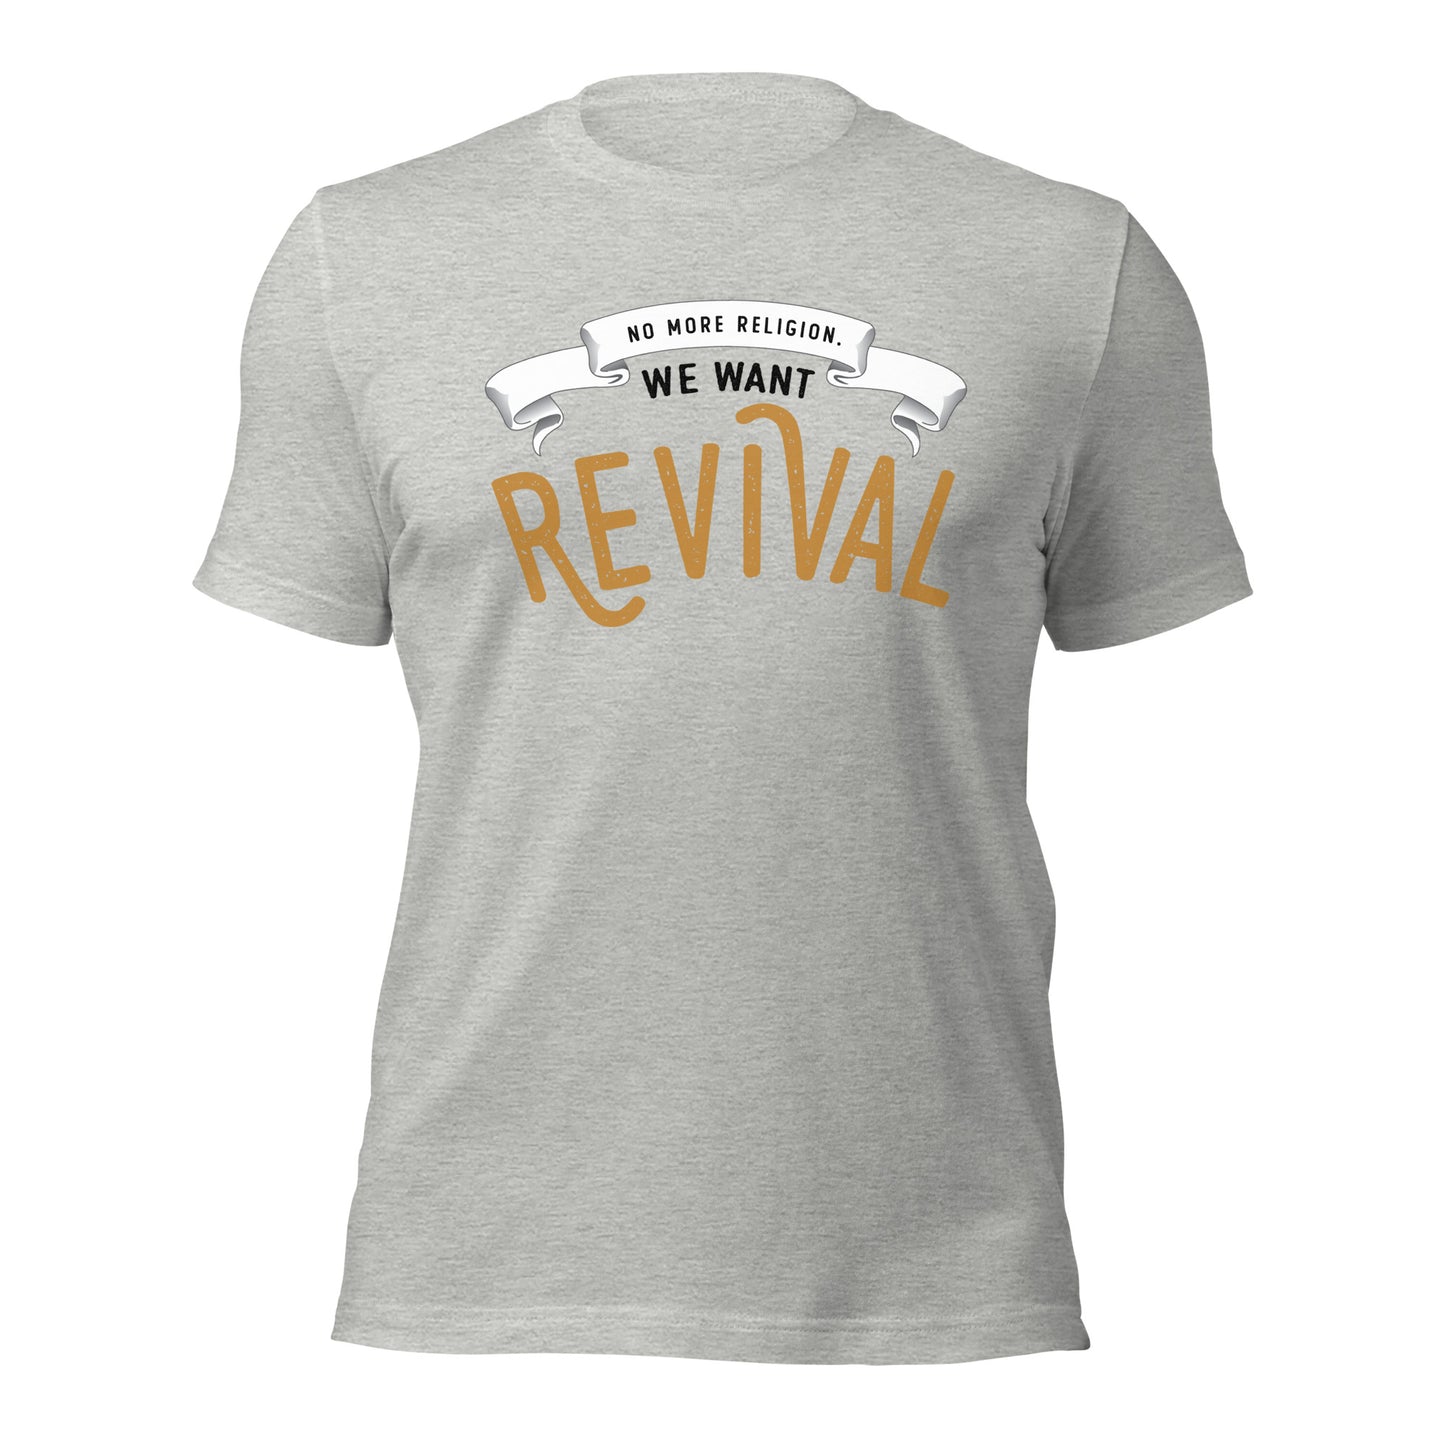 Athletic Heather Gray Christian aesthetic soft Unisex T-shirt that says, No More Religion We Want Revival printed in gold and black, church gift Jesus graphic tees designed for men and women 